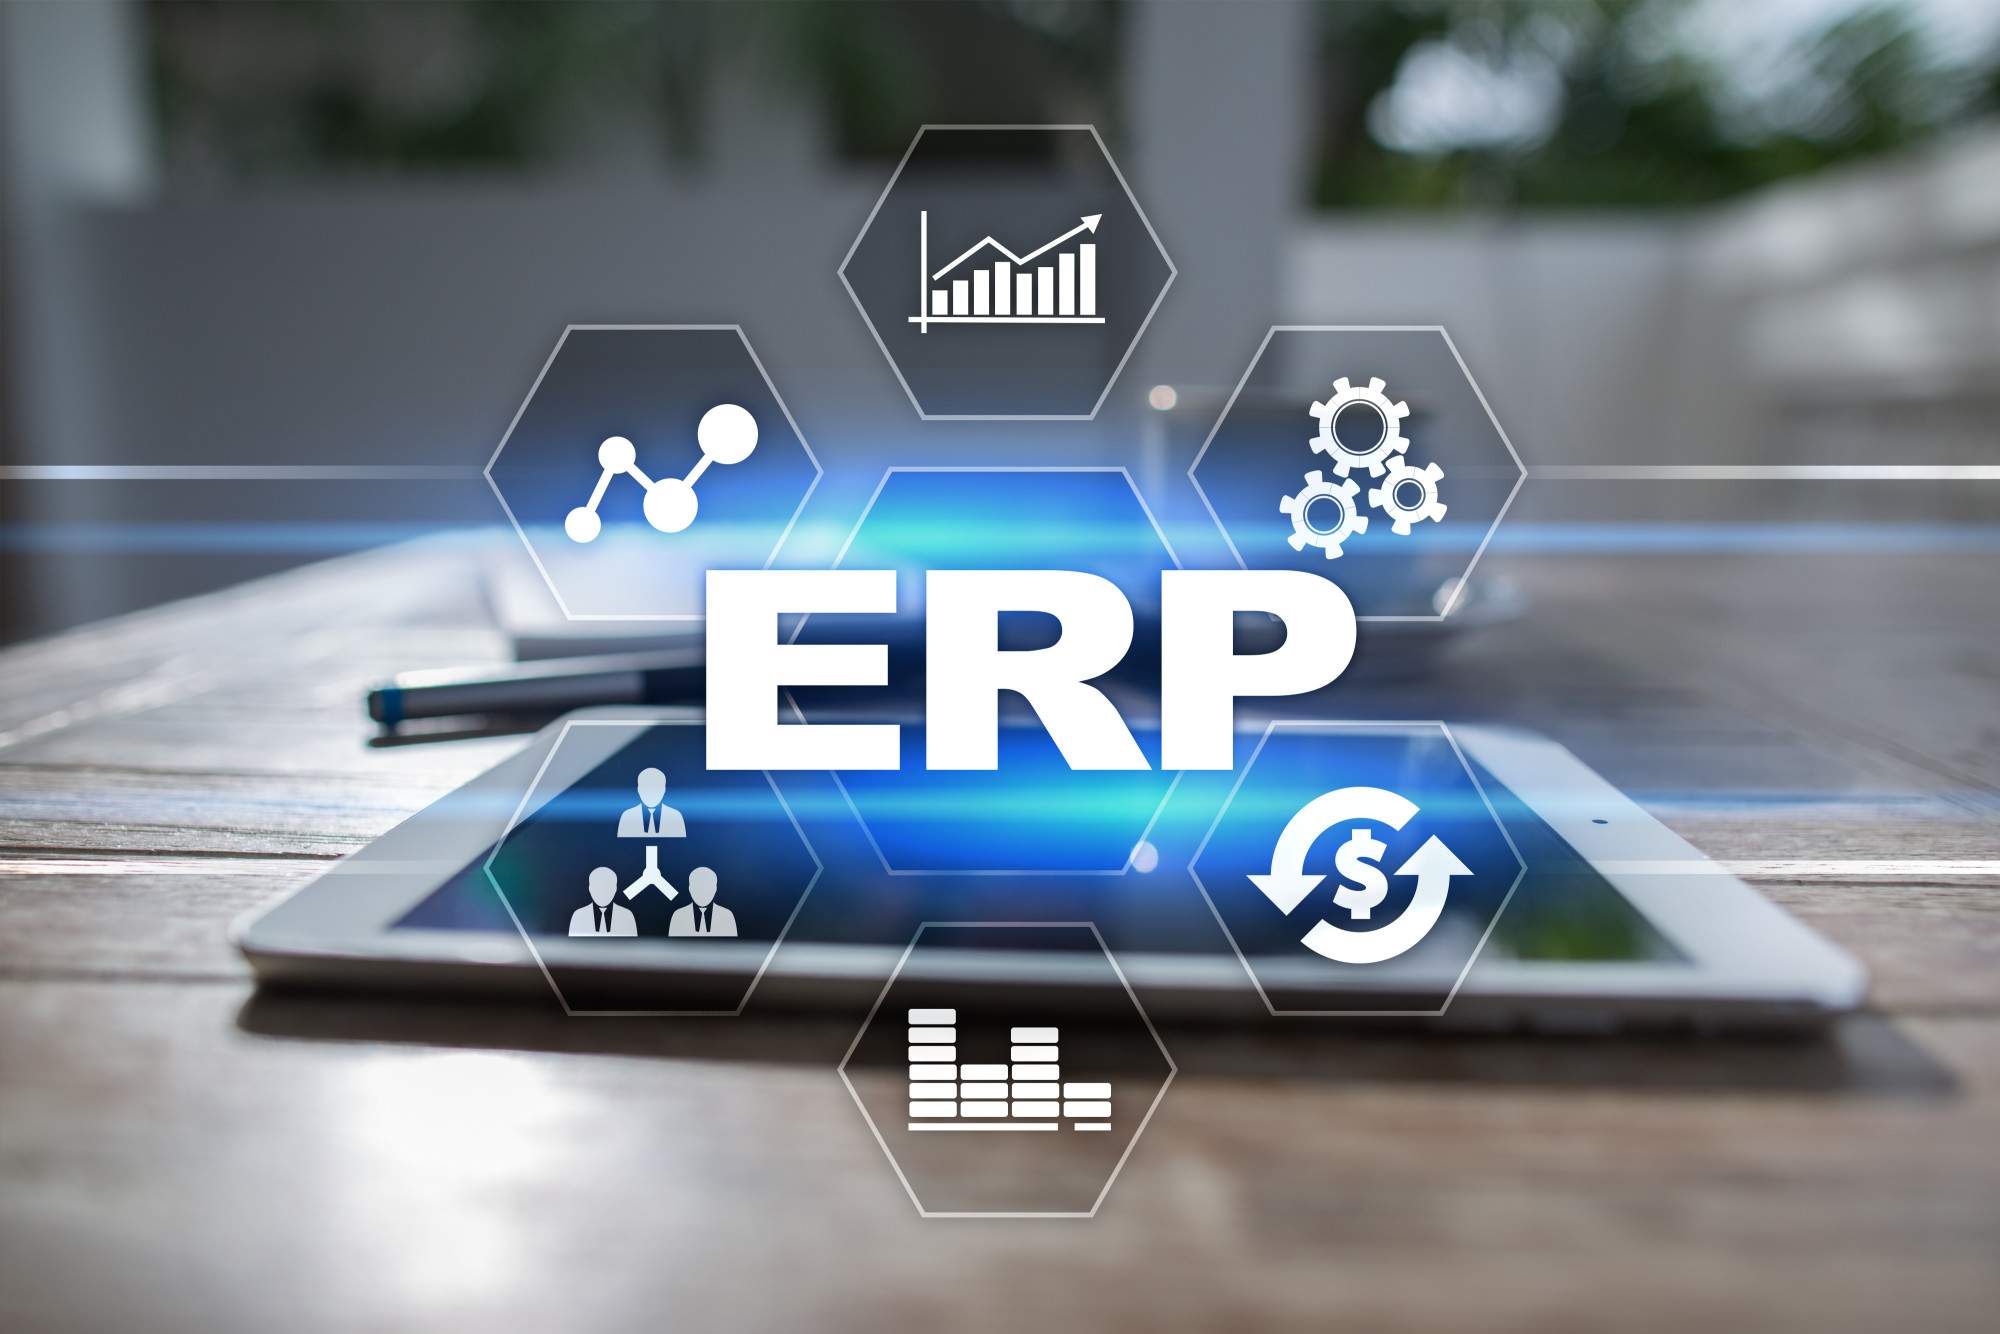 Erp vs Scm: What Are the Differences?